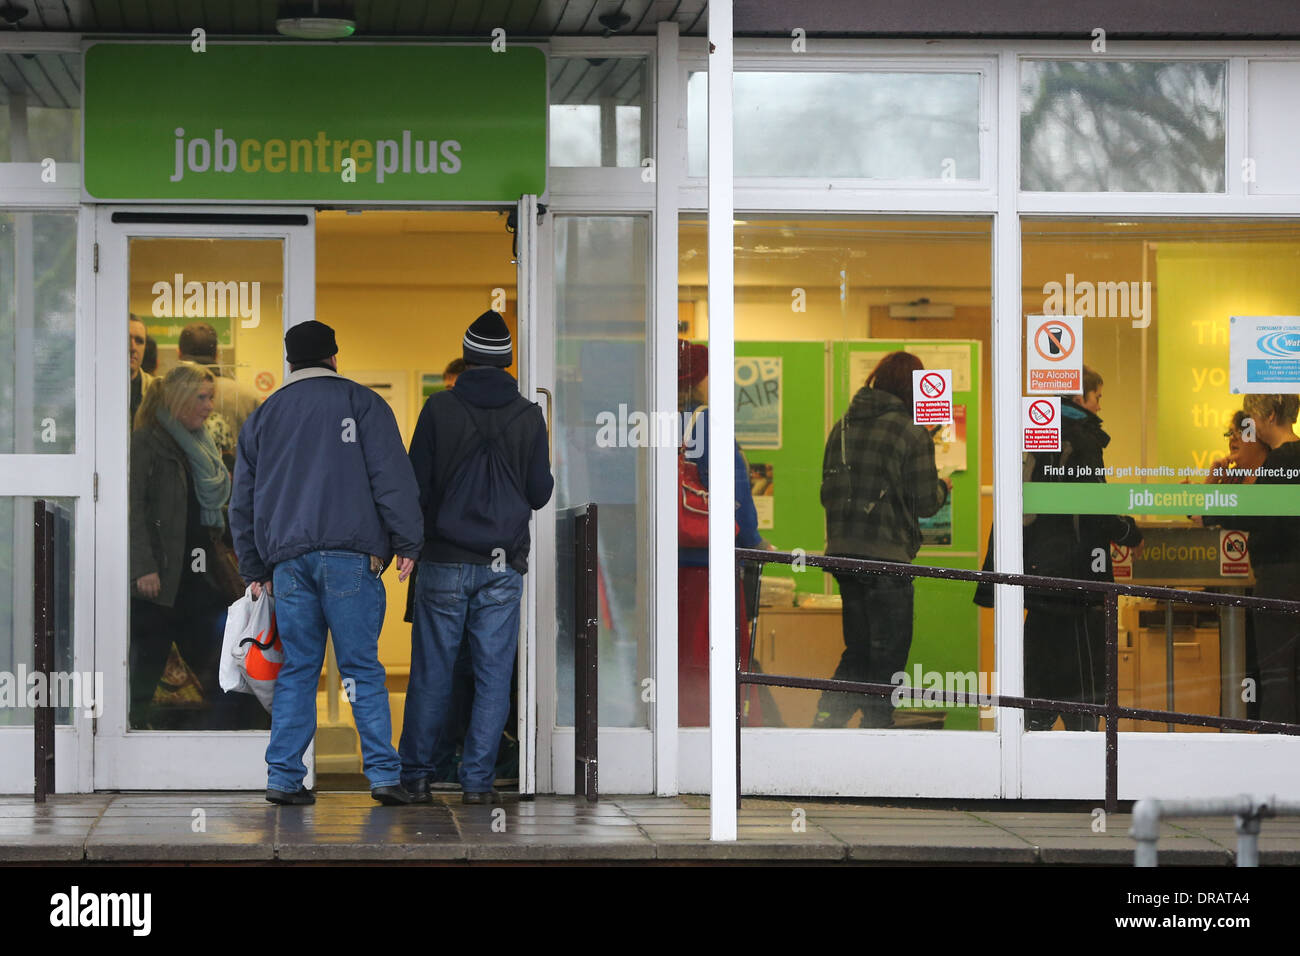 CAMBRIDGE JOB CENTRE PLUS FOR PEOPLE WHO ARE UNEMPLOYED AND LOOKING FRO A JOB Stock Photo